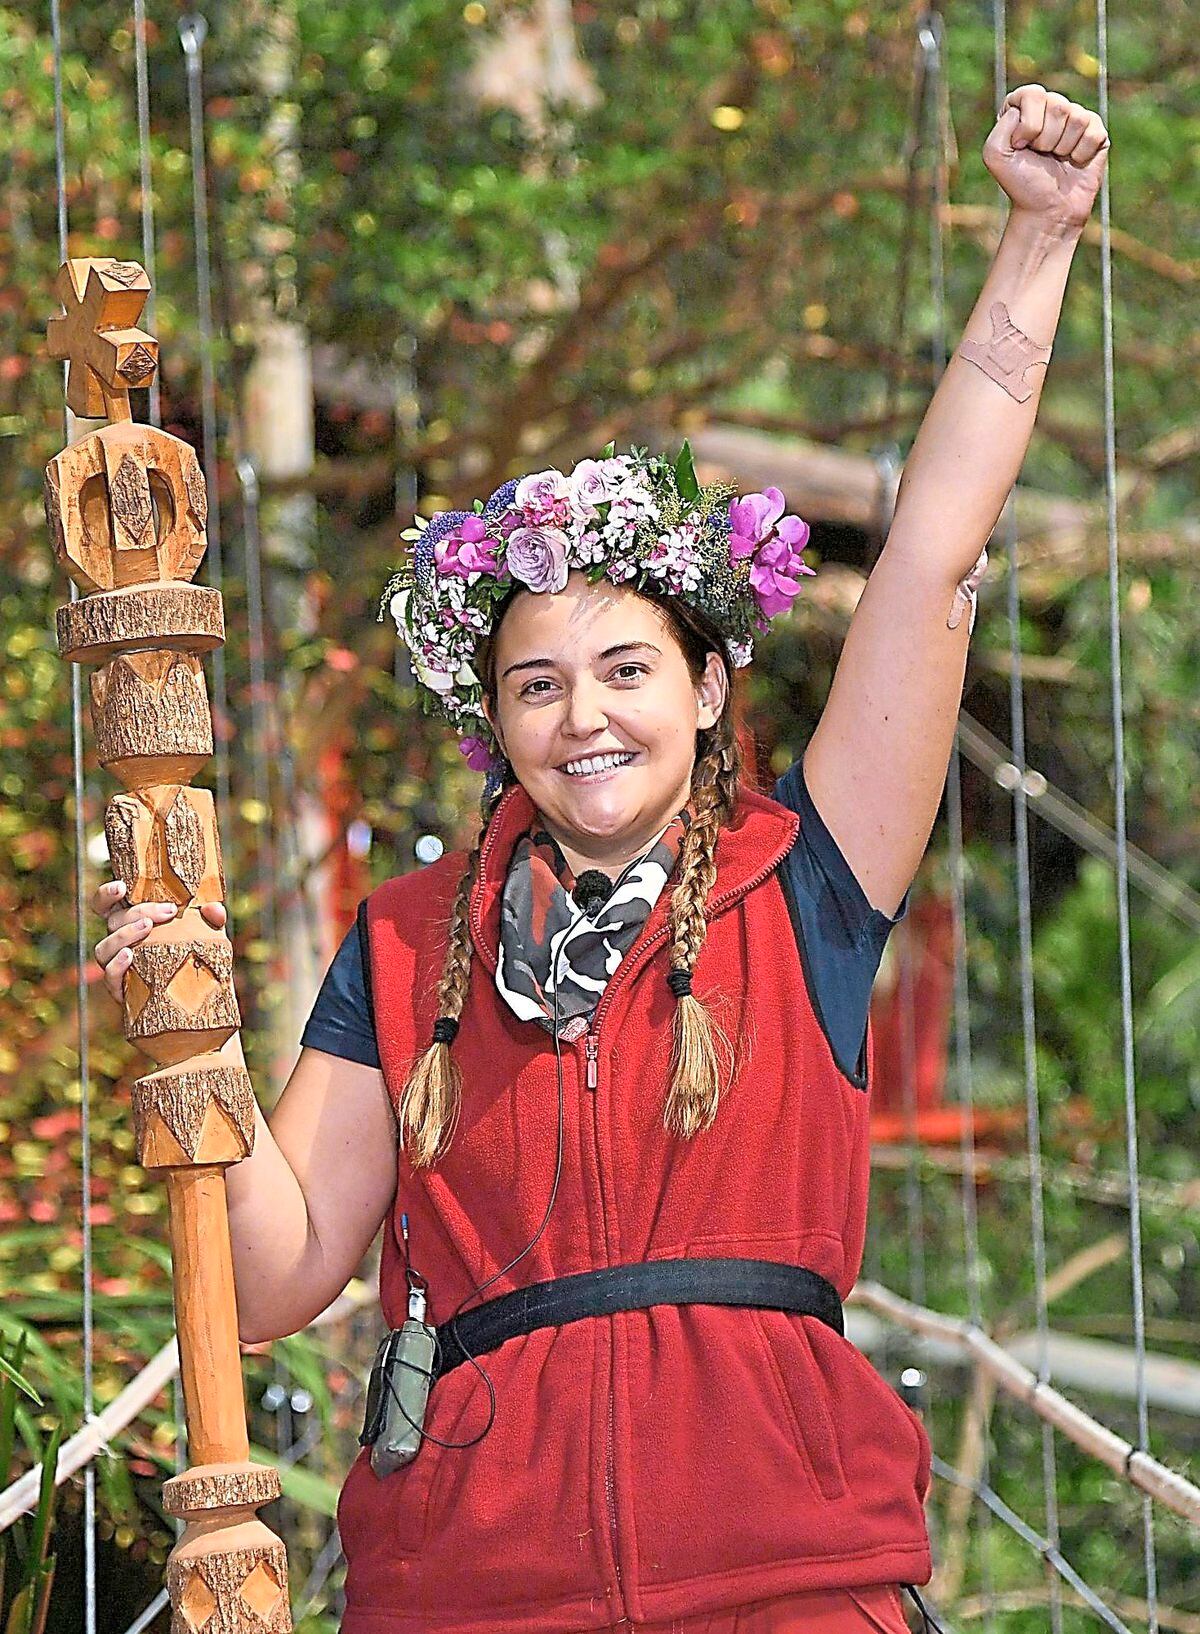 Jacqueline Jossa won last year’s series in the jungle head of New South Wales